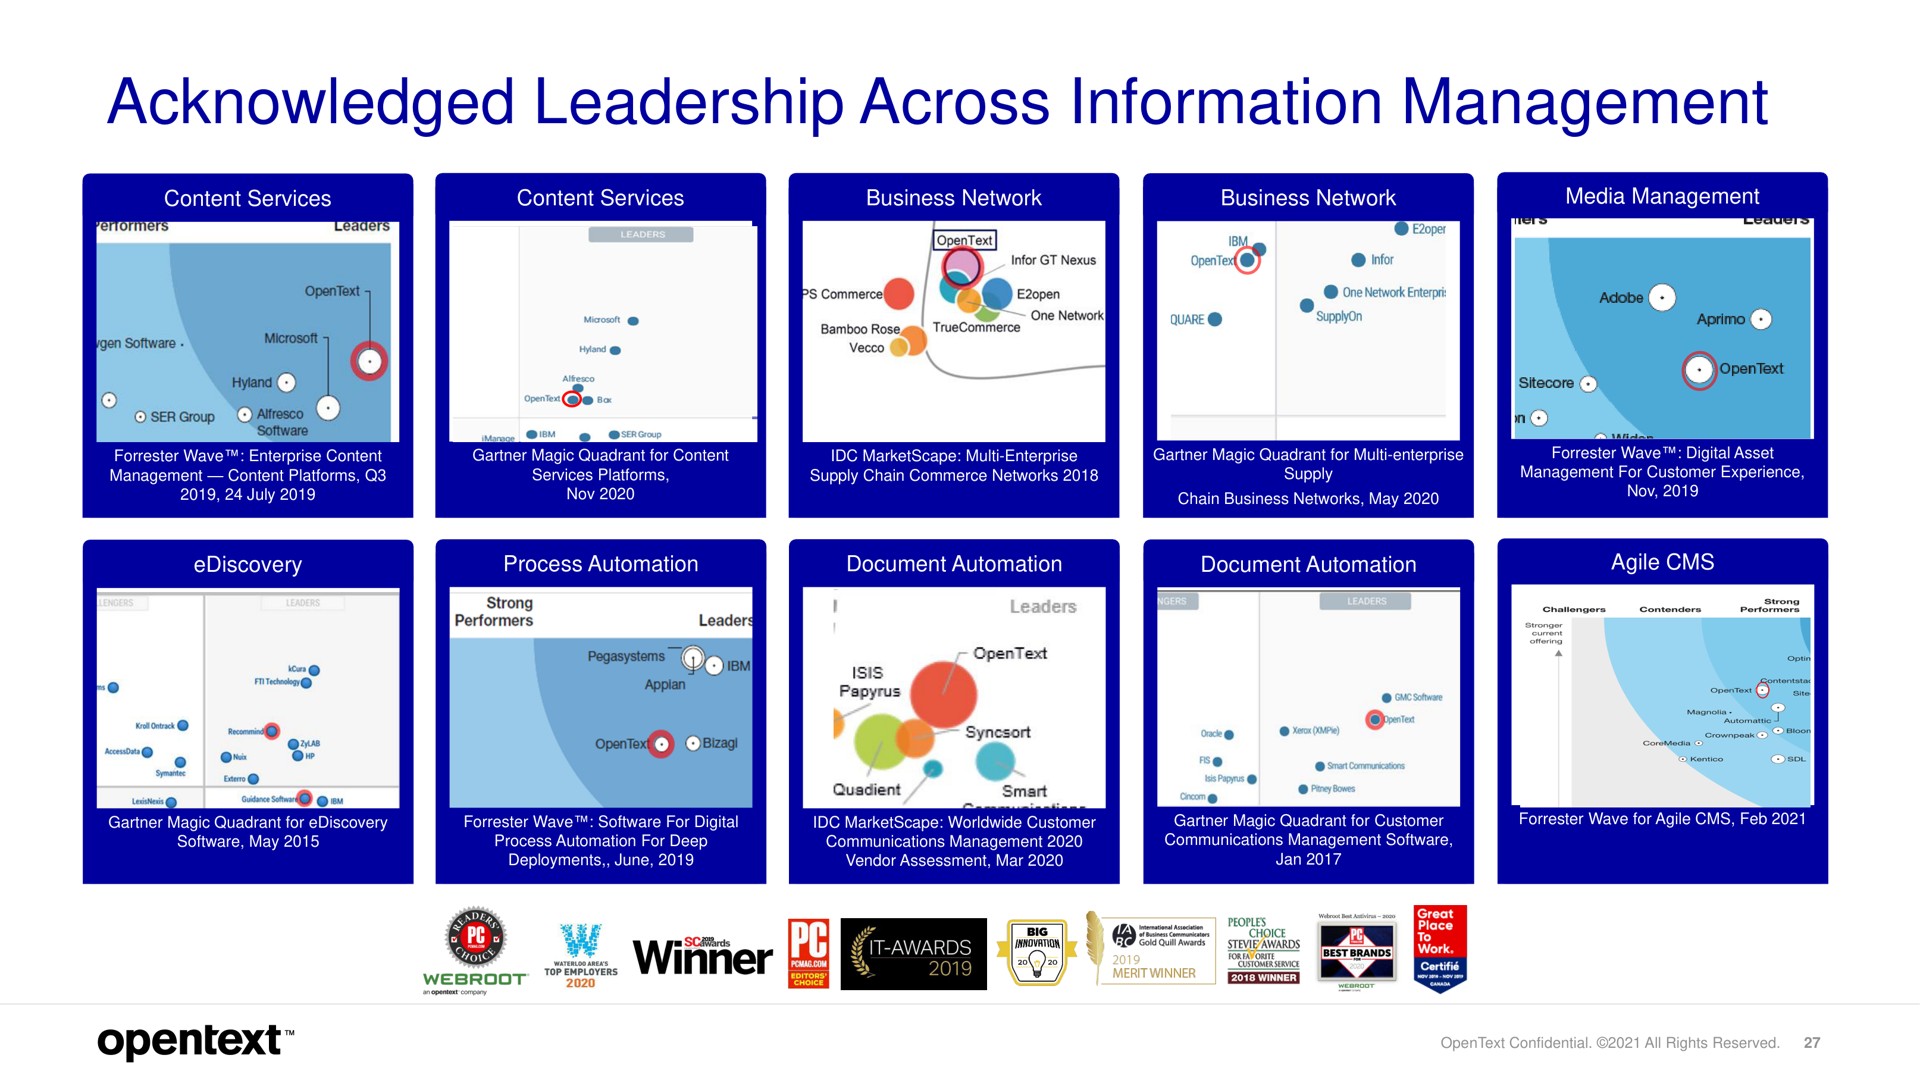 acknowledged leadership across information management | OpenText